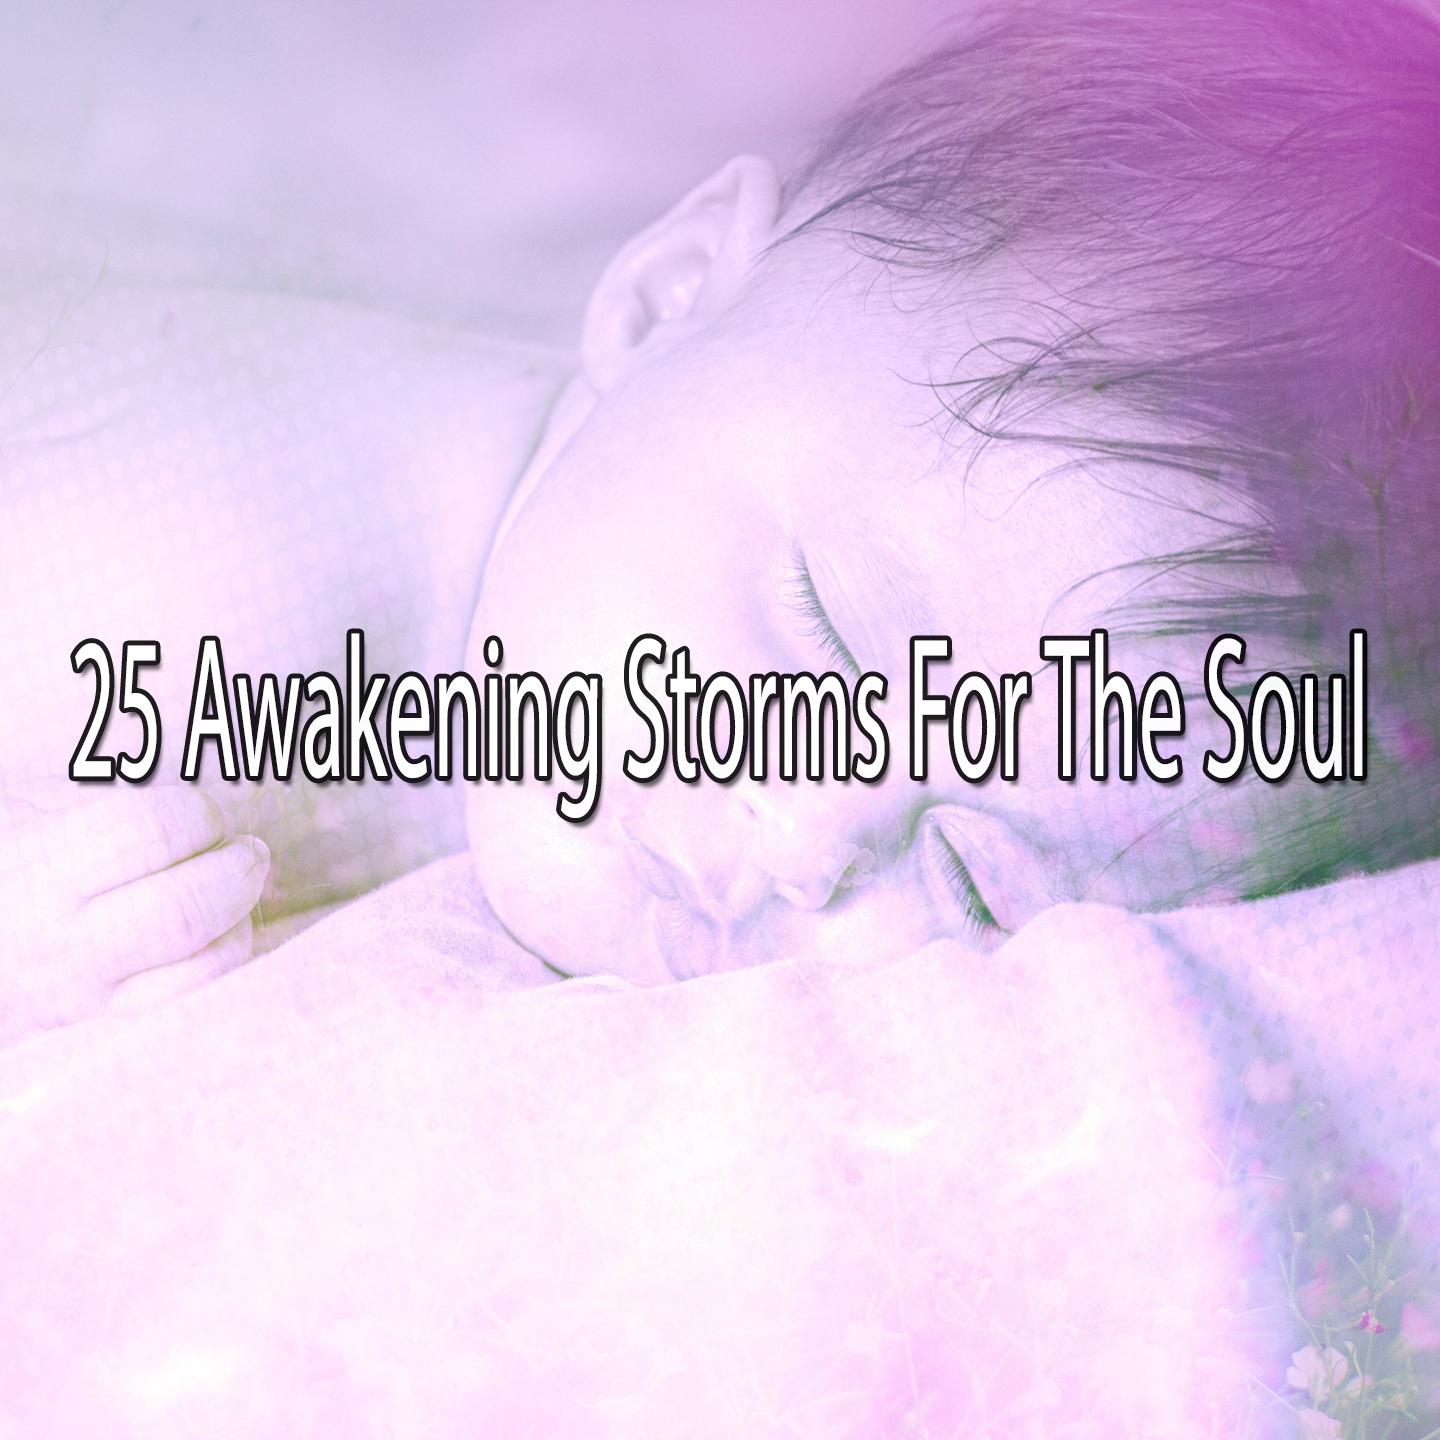 25 Awakening Storms For The Soul